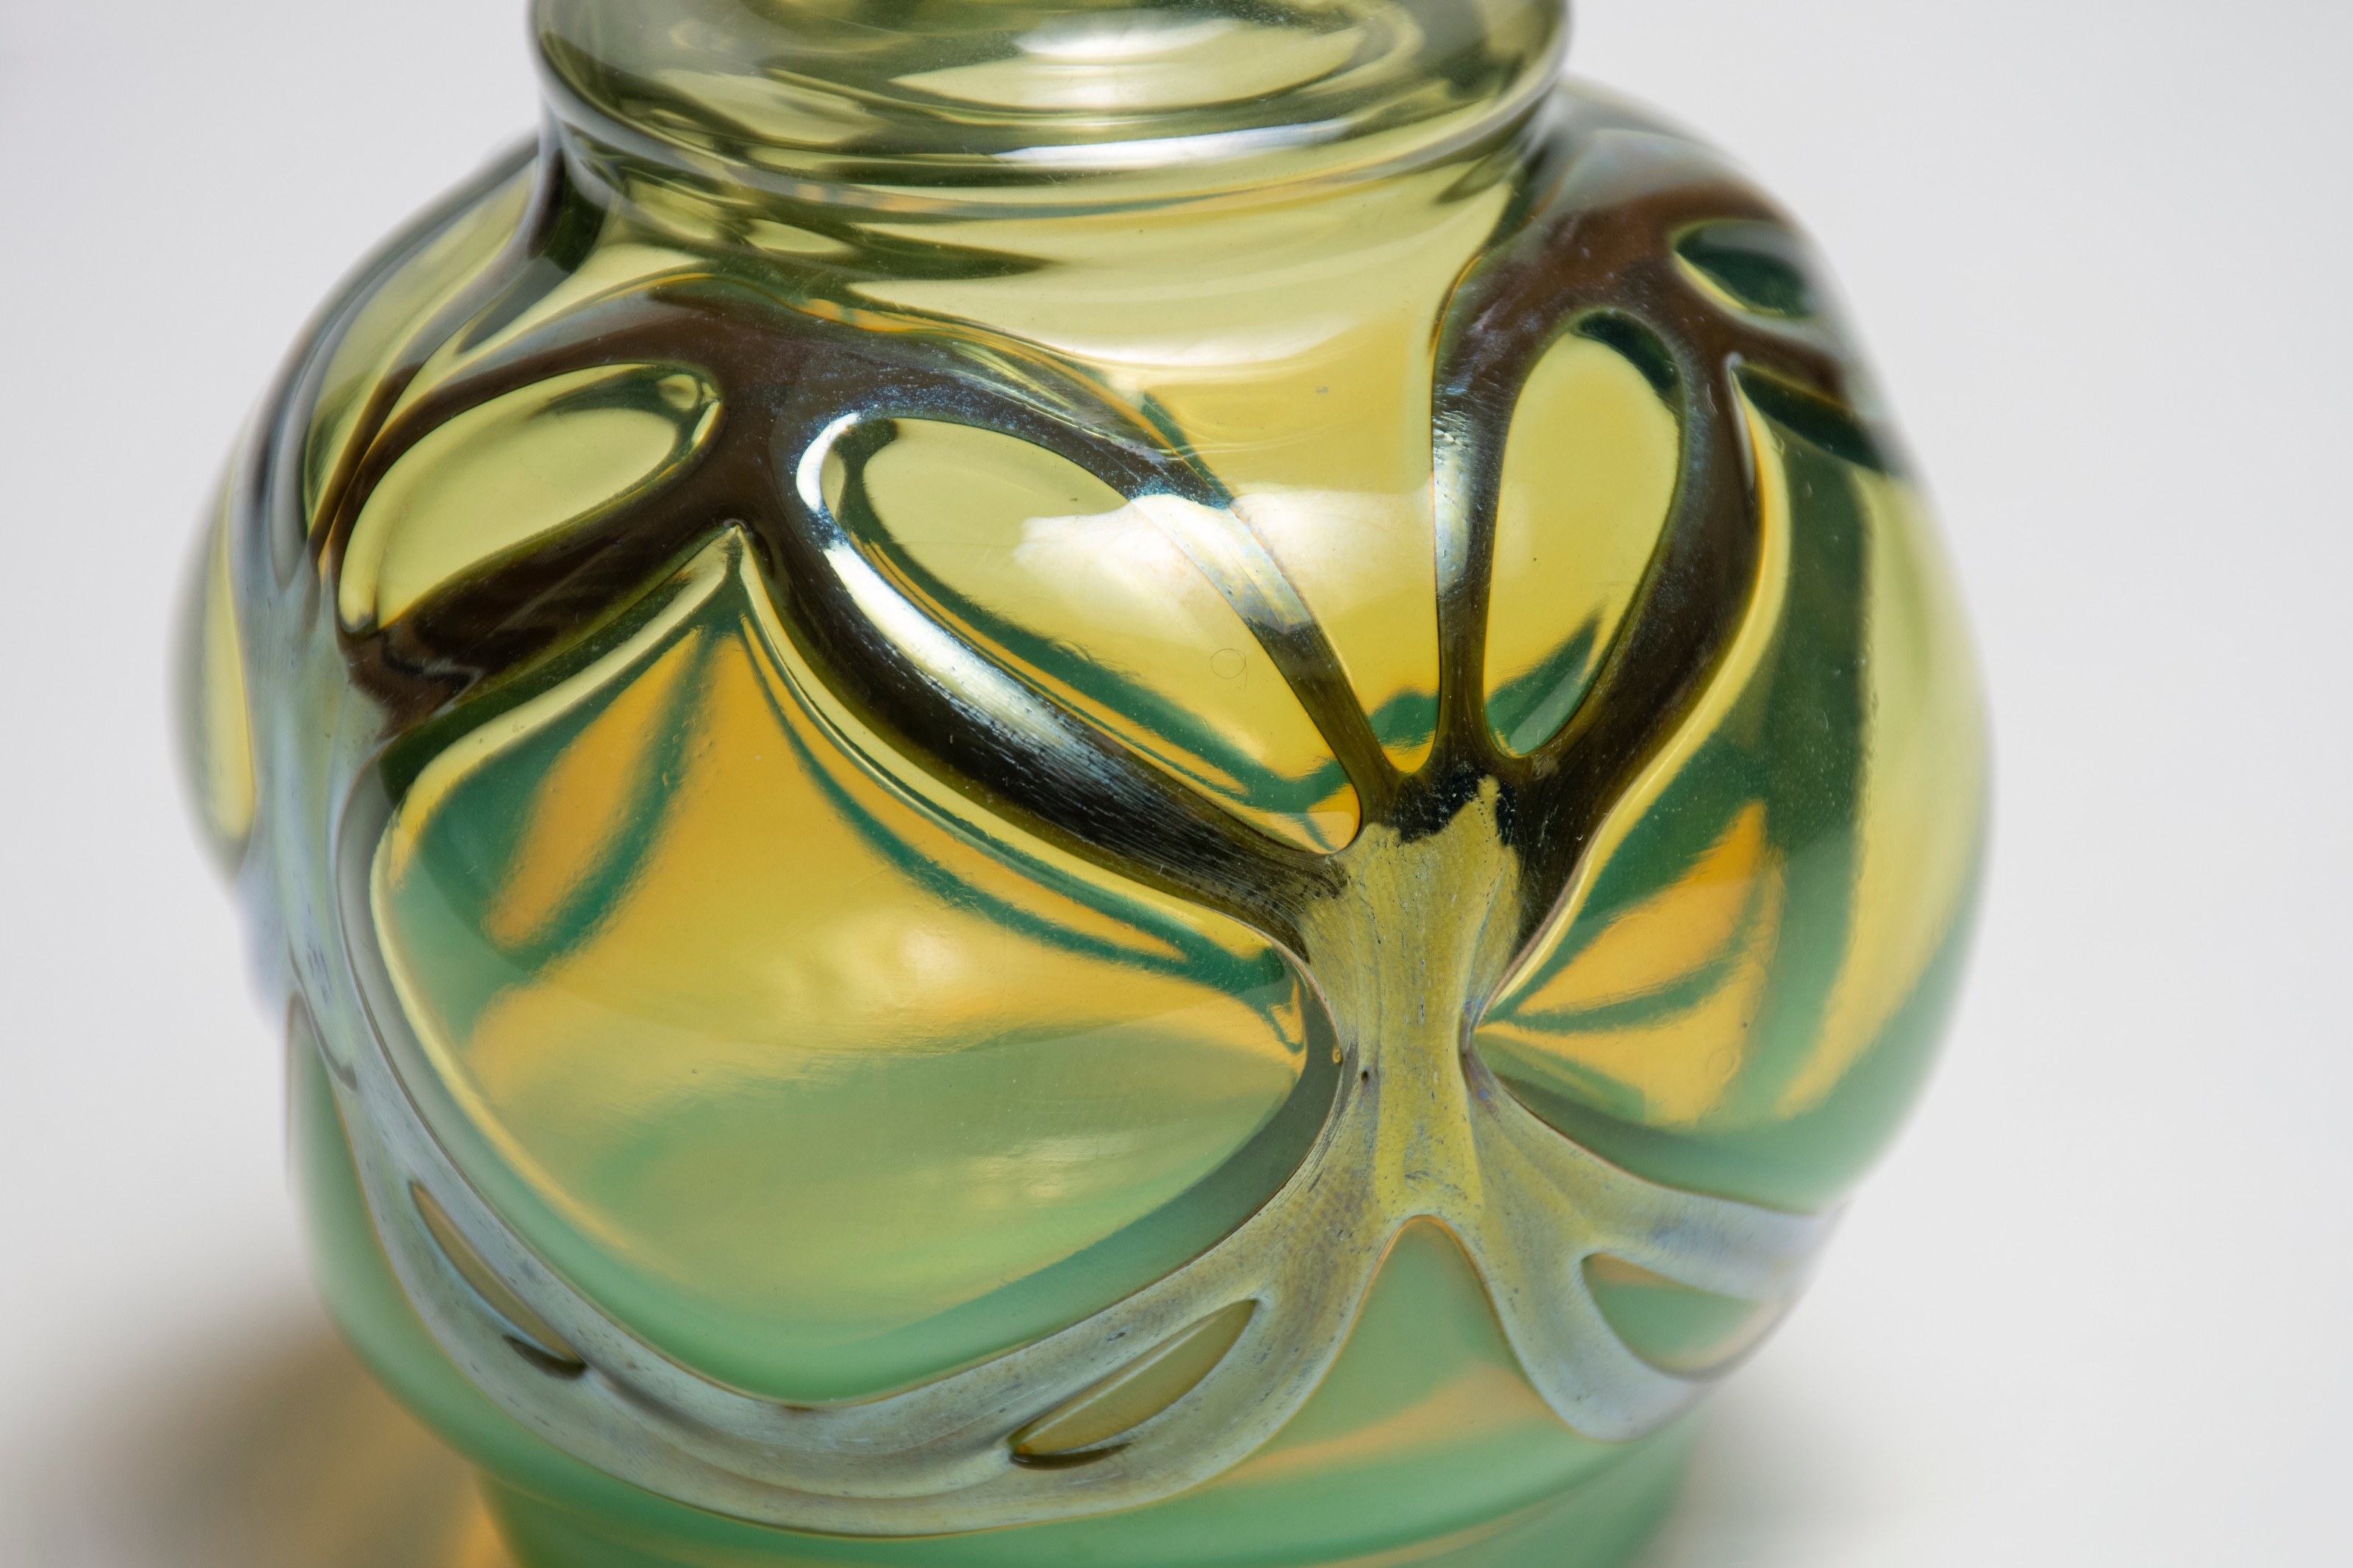 a close up showing the silvery favrile glass which has been applied to this early tiffany cabinet vase to mimic a &quot;blown through&quot; technique used in louis comfort tiffany's metalwork